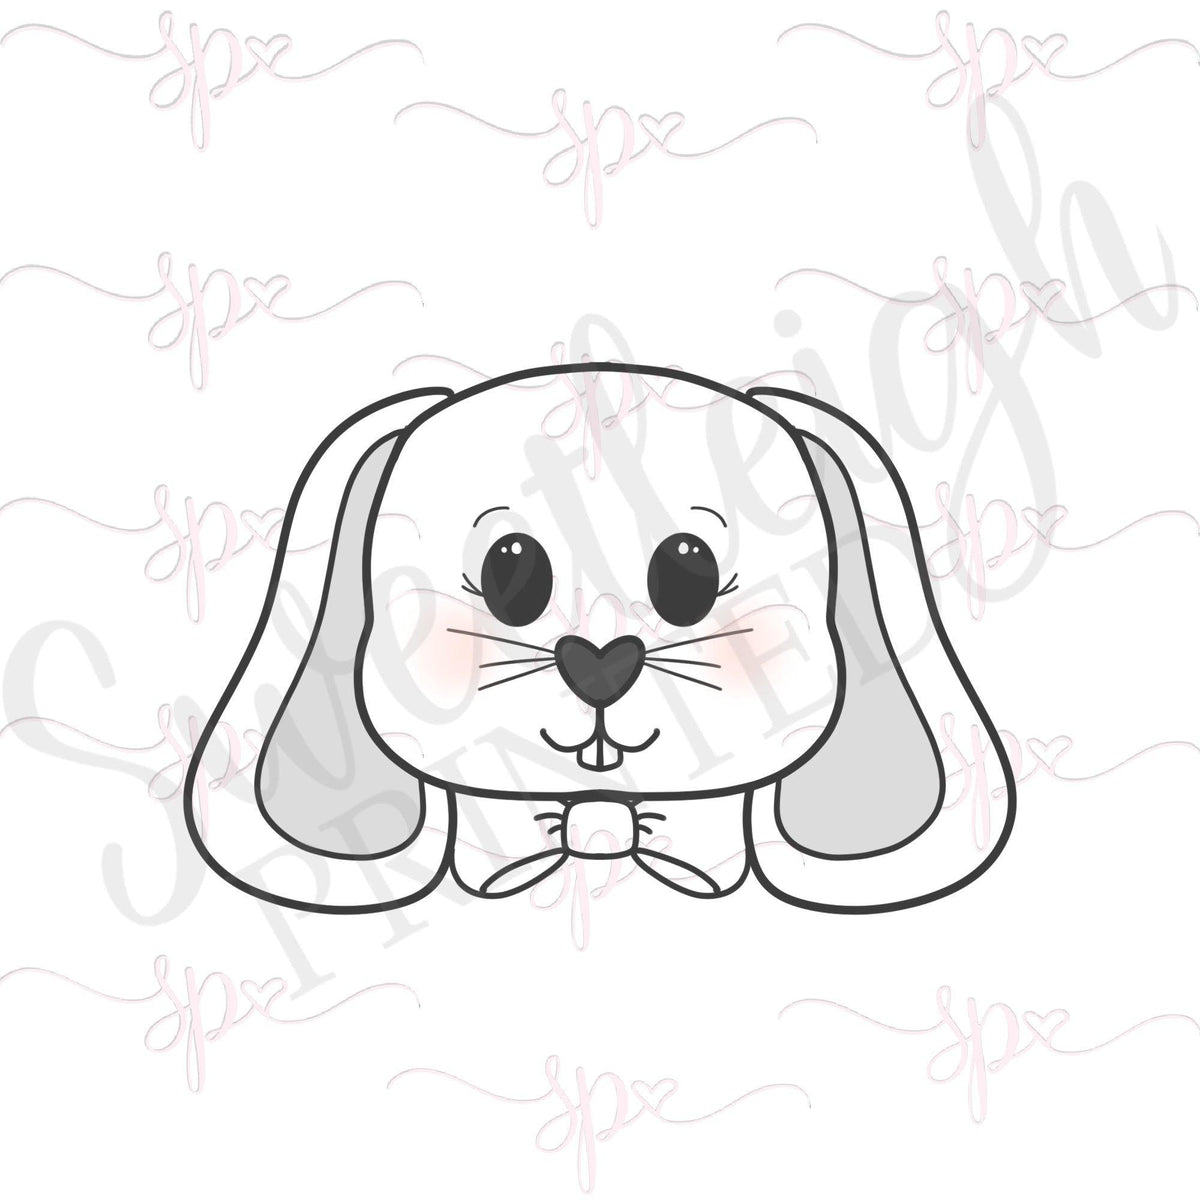 Bowtie Bunny Face 2020 Cookie Cutter - Sweetleigh 